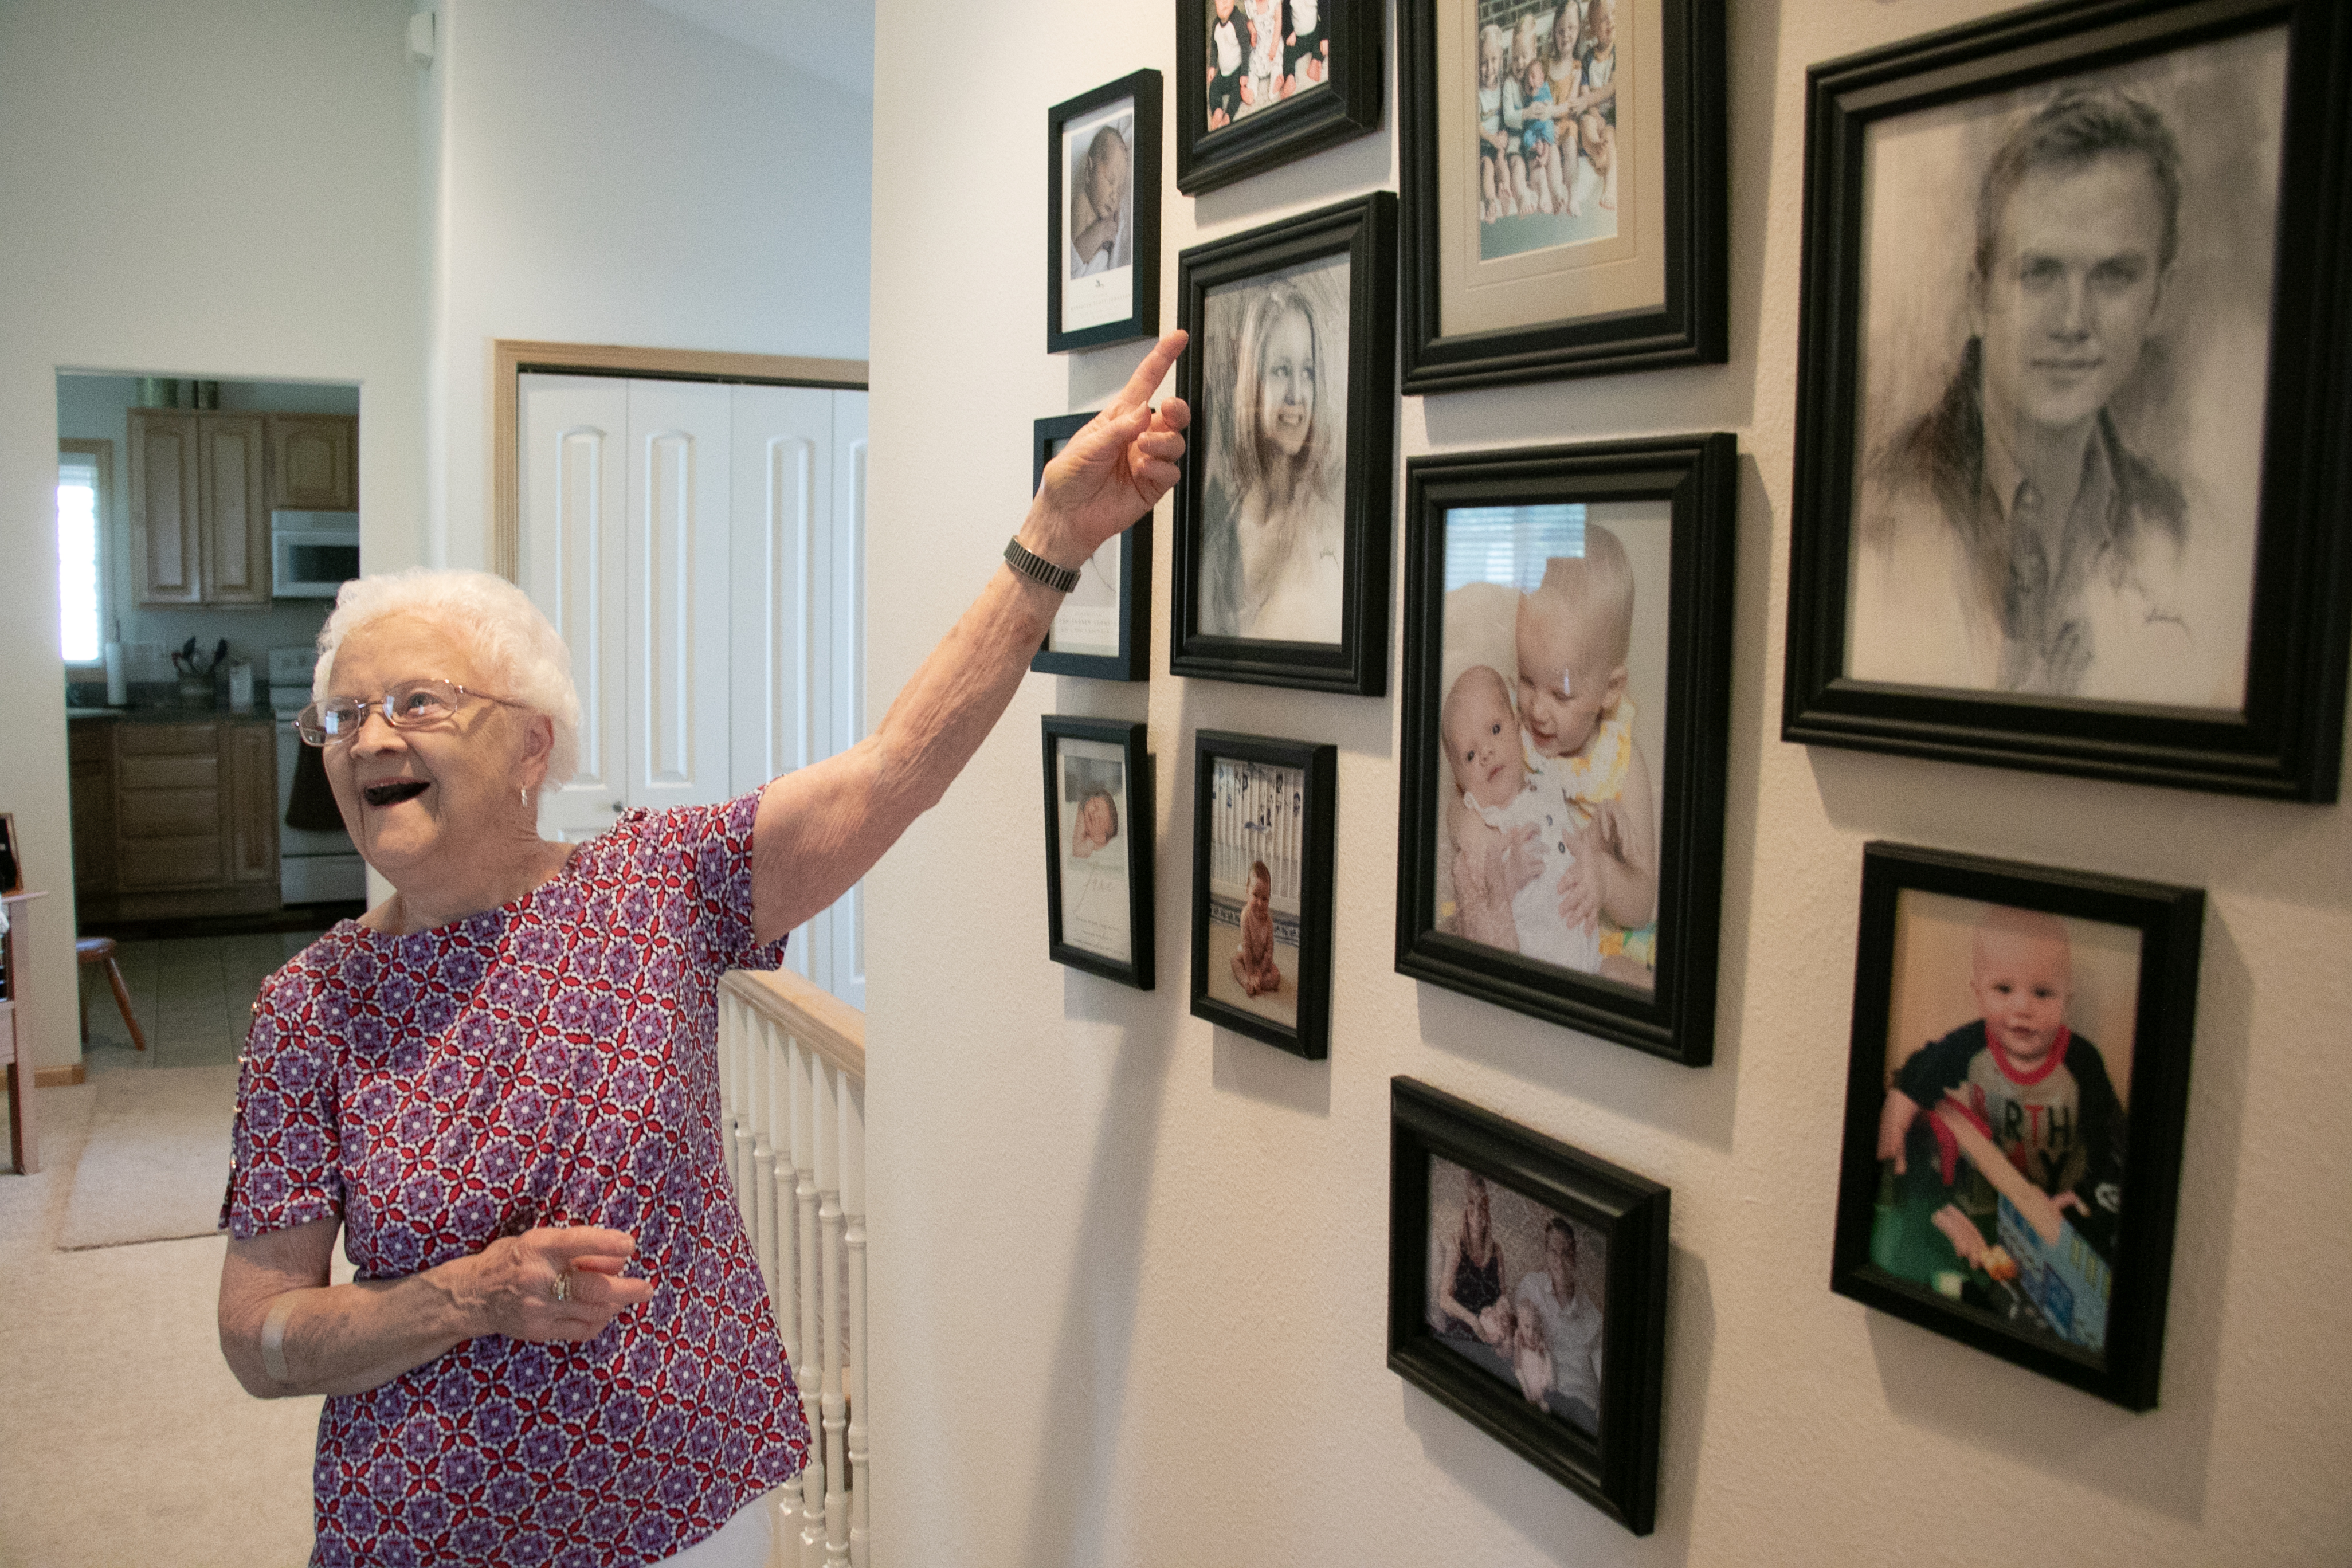 An older woman points to framed photos of her family on her wall and smiles.